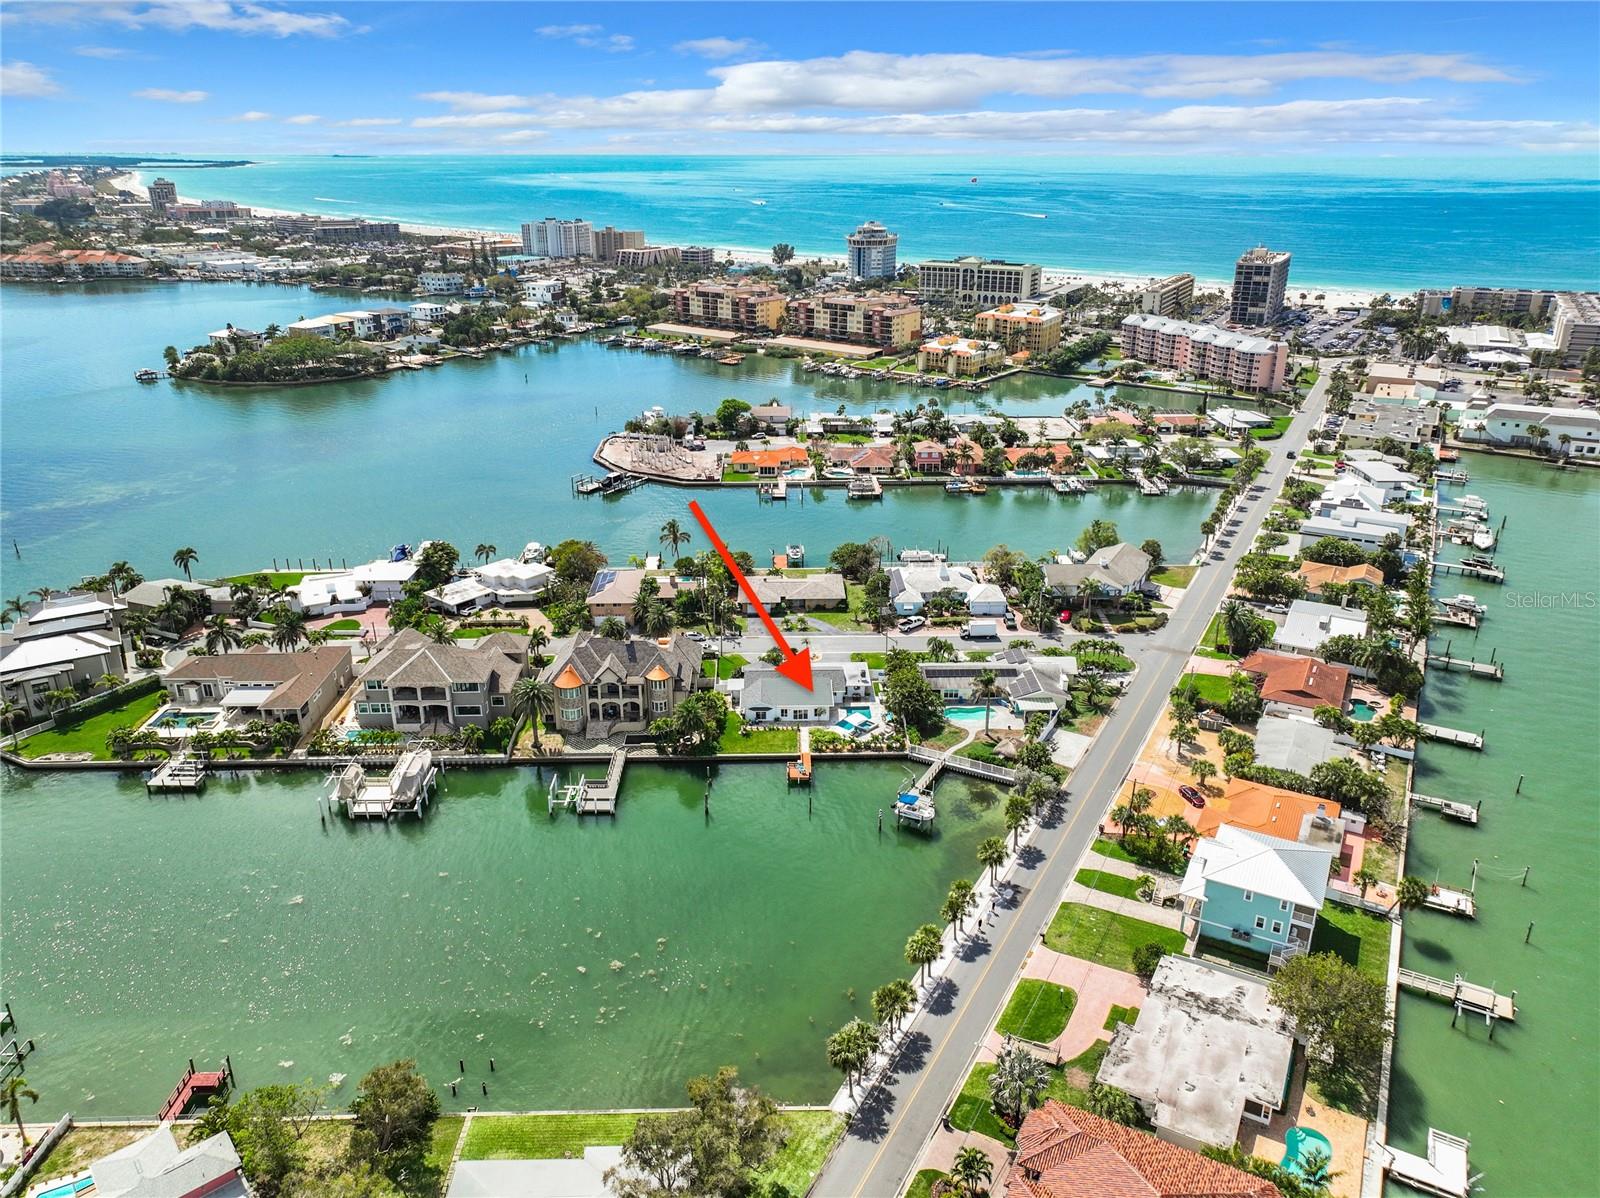 5407 Leilani Drive is literally 750 steps from the powdery white sands of the Gulf of Mexico (Yes, we've counted them!). Access the beach via the neighborhood's deeded access!